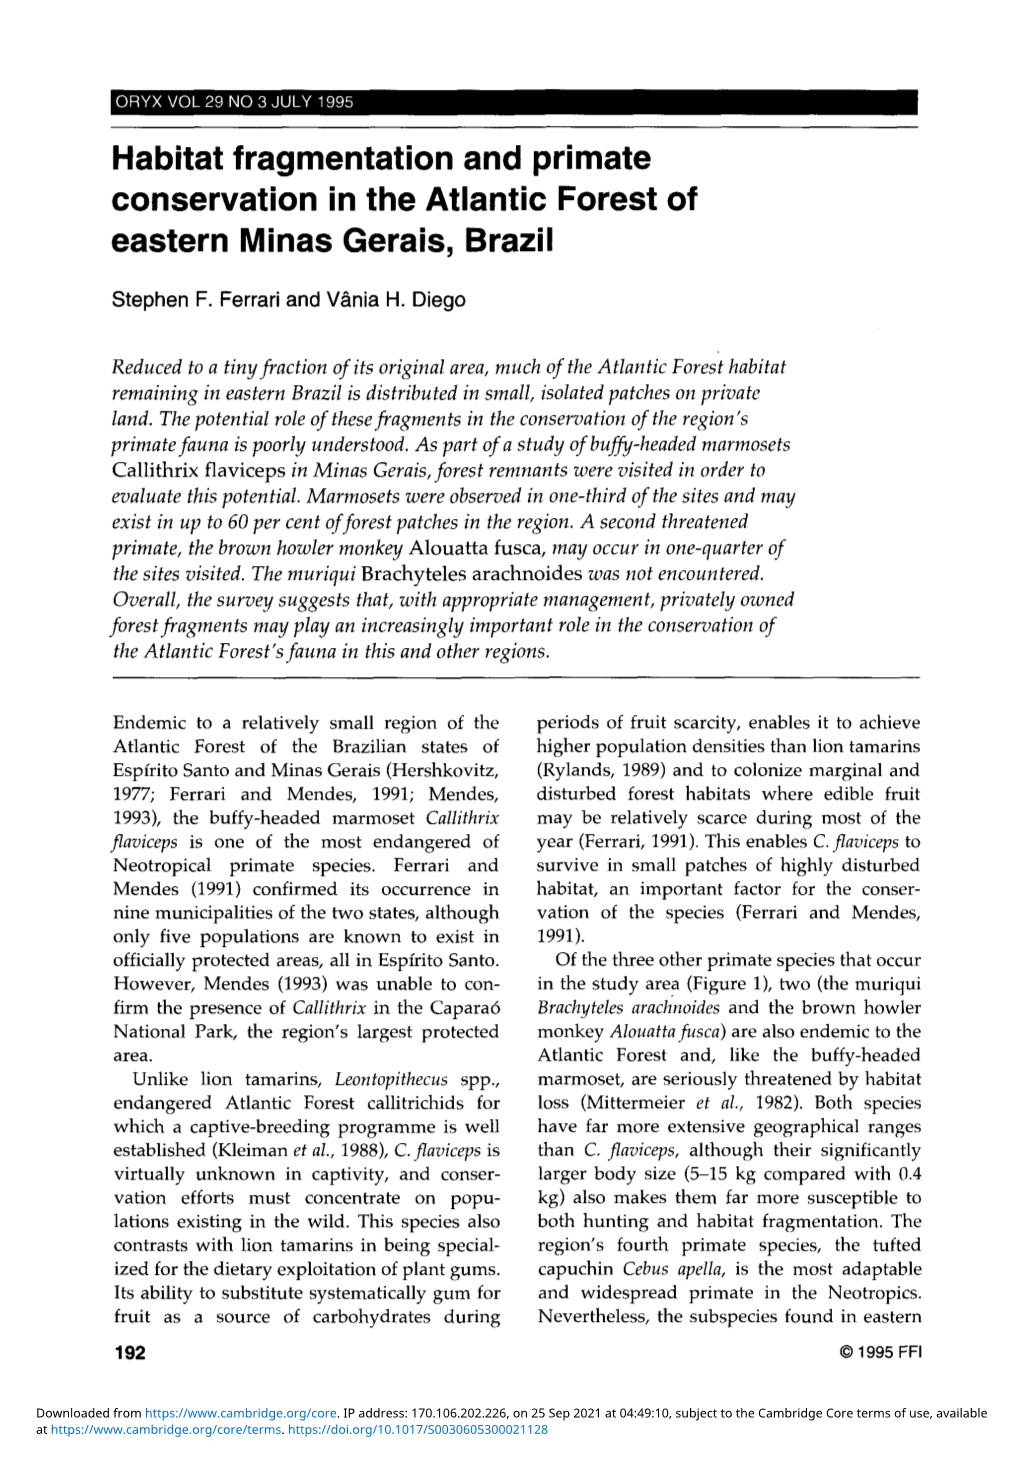 Habitat Fragmentation and Primate Conservation in the Atlantic Forest of Eastern Minas Gerais, Brazil